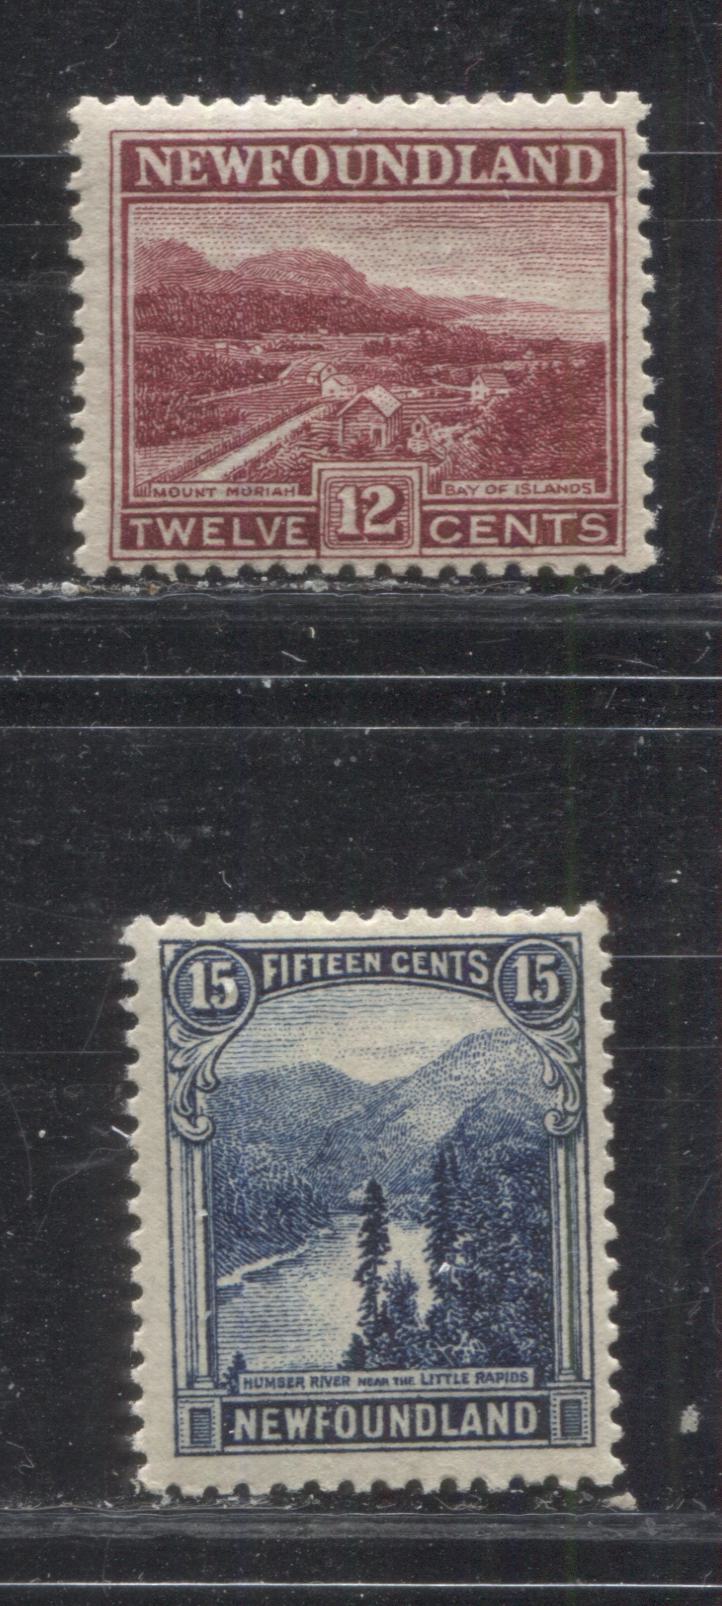 Lot 58 Newfoundland # 141-142 12c & 15c Deep Claret & Dark Blue Mount Moriah & Little Rapids, 1923-1928 Pictorial Issue, Two Fine NH Examples, Comb Perf. 14.1 x 13.8 and 14 x 14.1